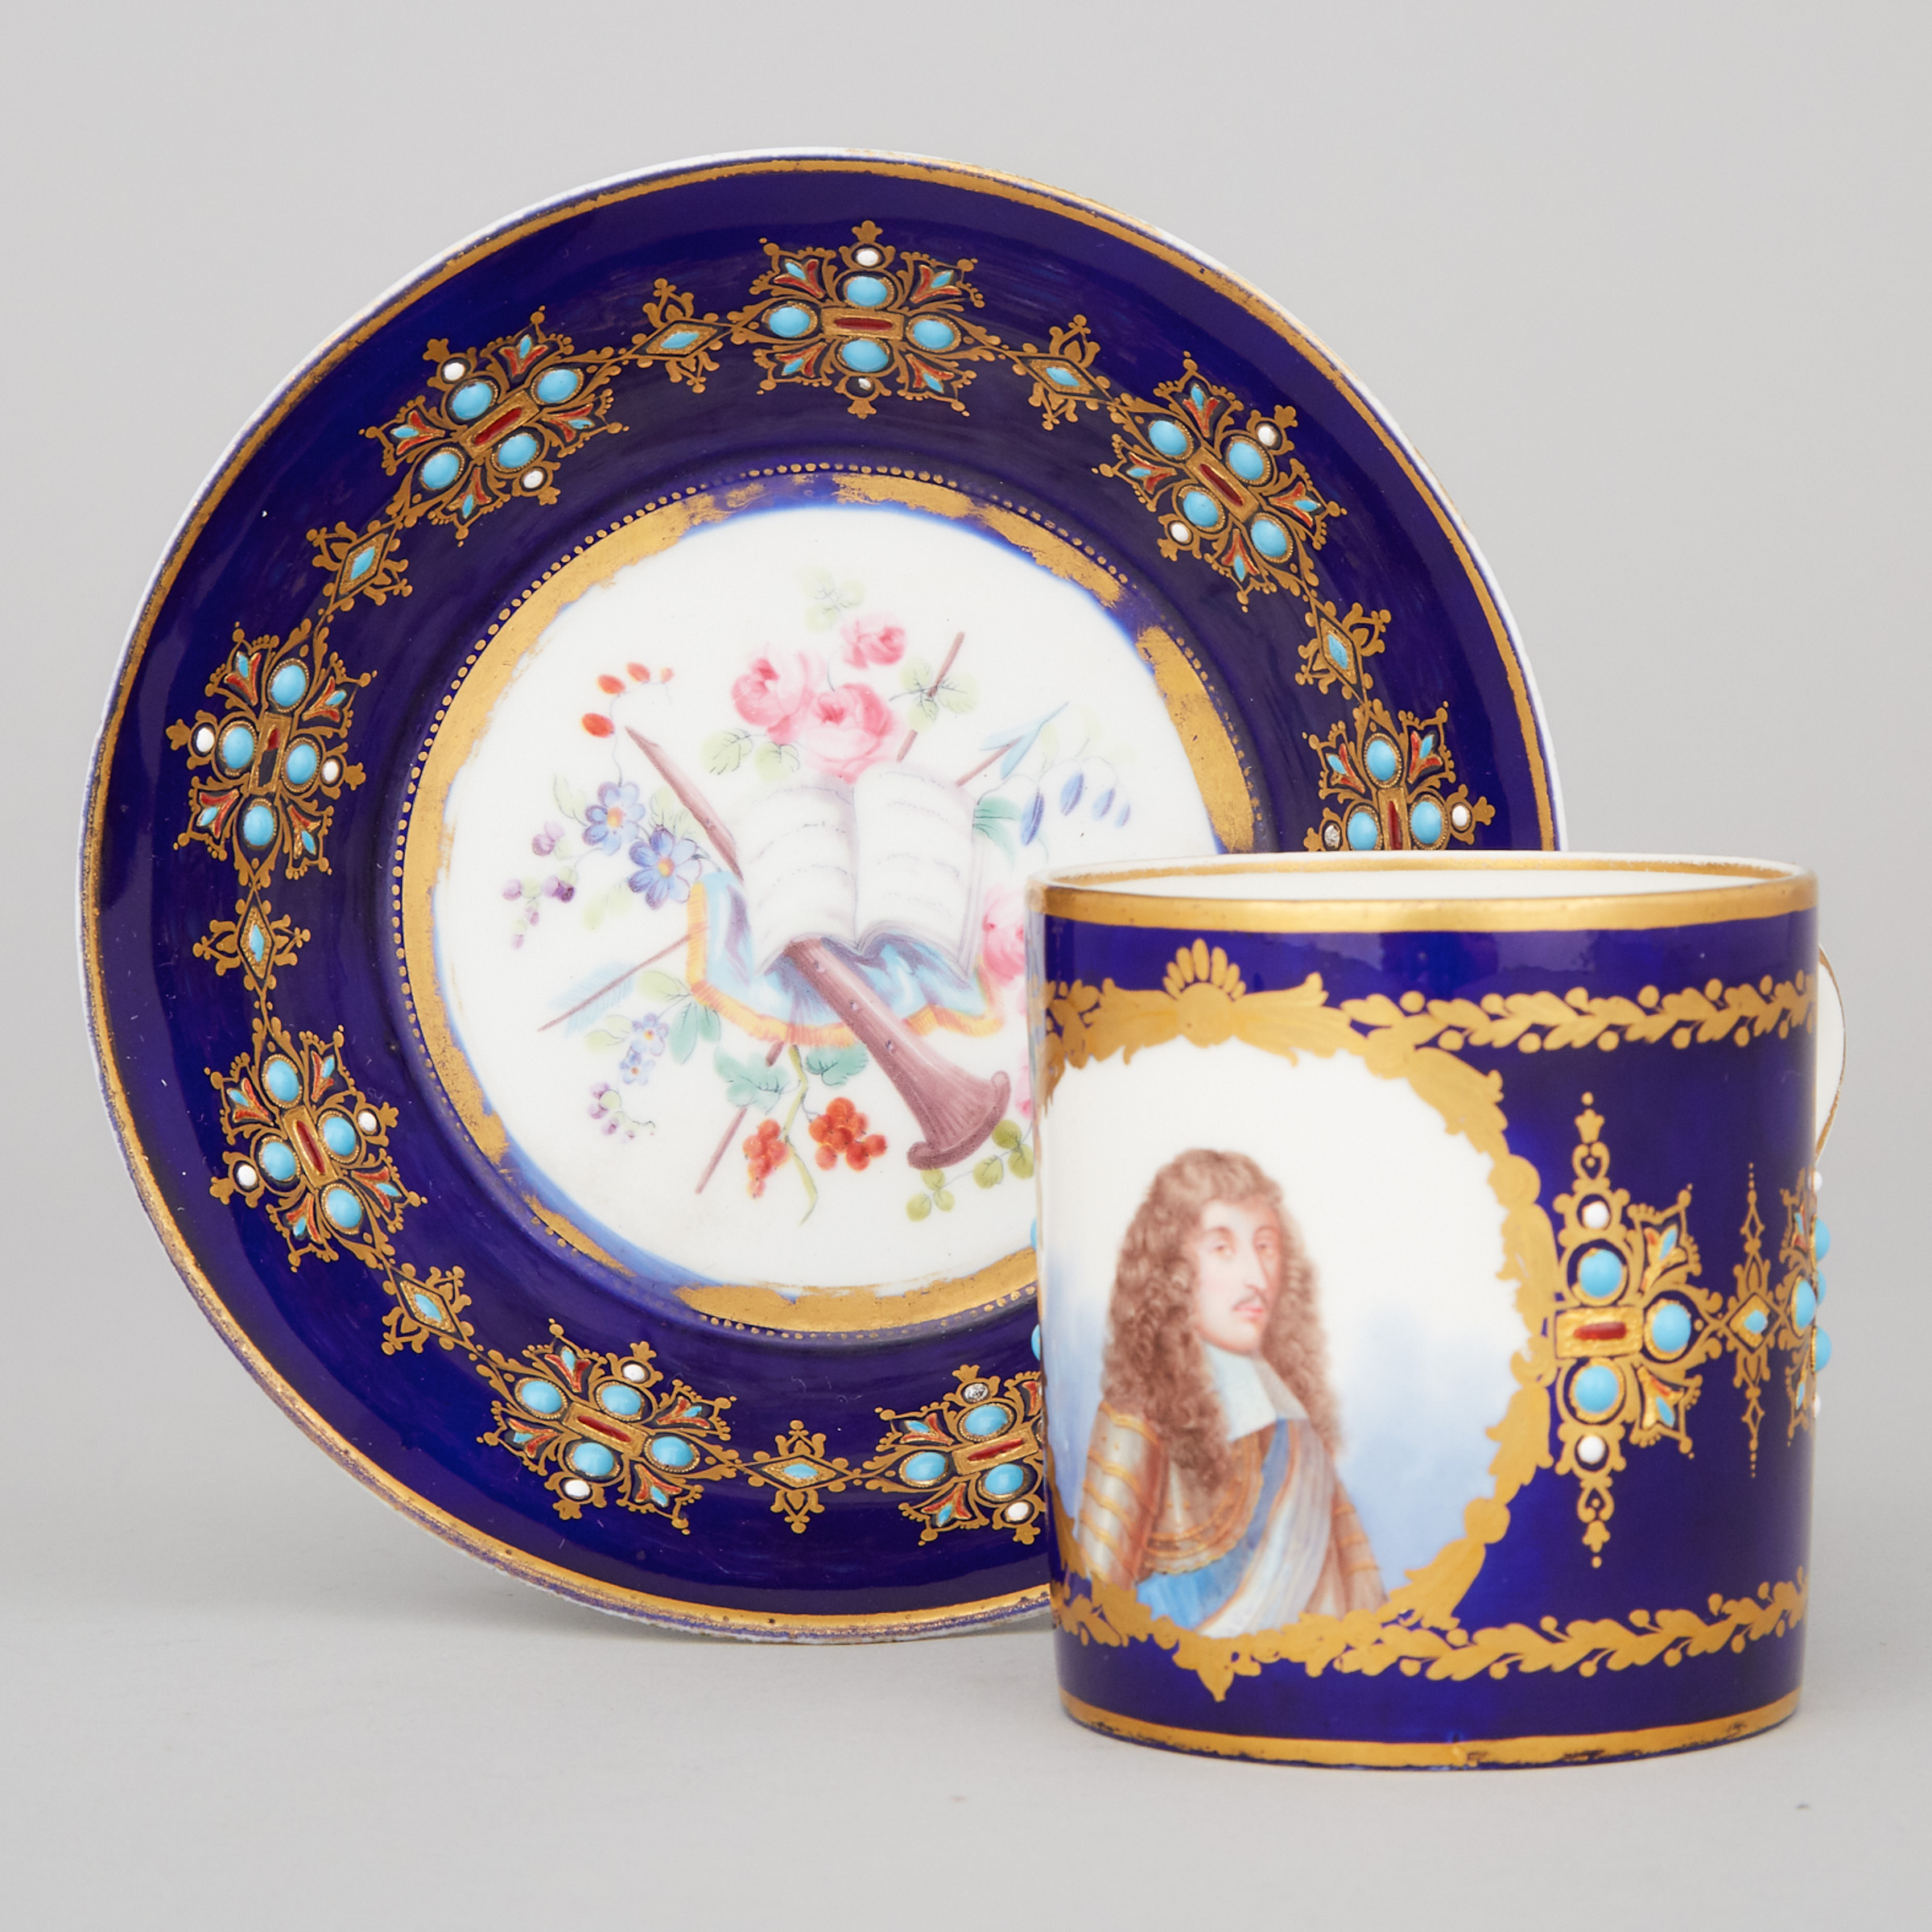 'Sèvres' 'Jeweled' Portrait Cup and Saucer, late 19th century